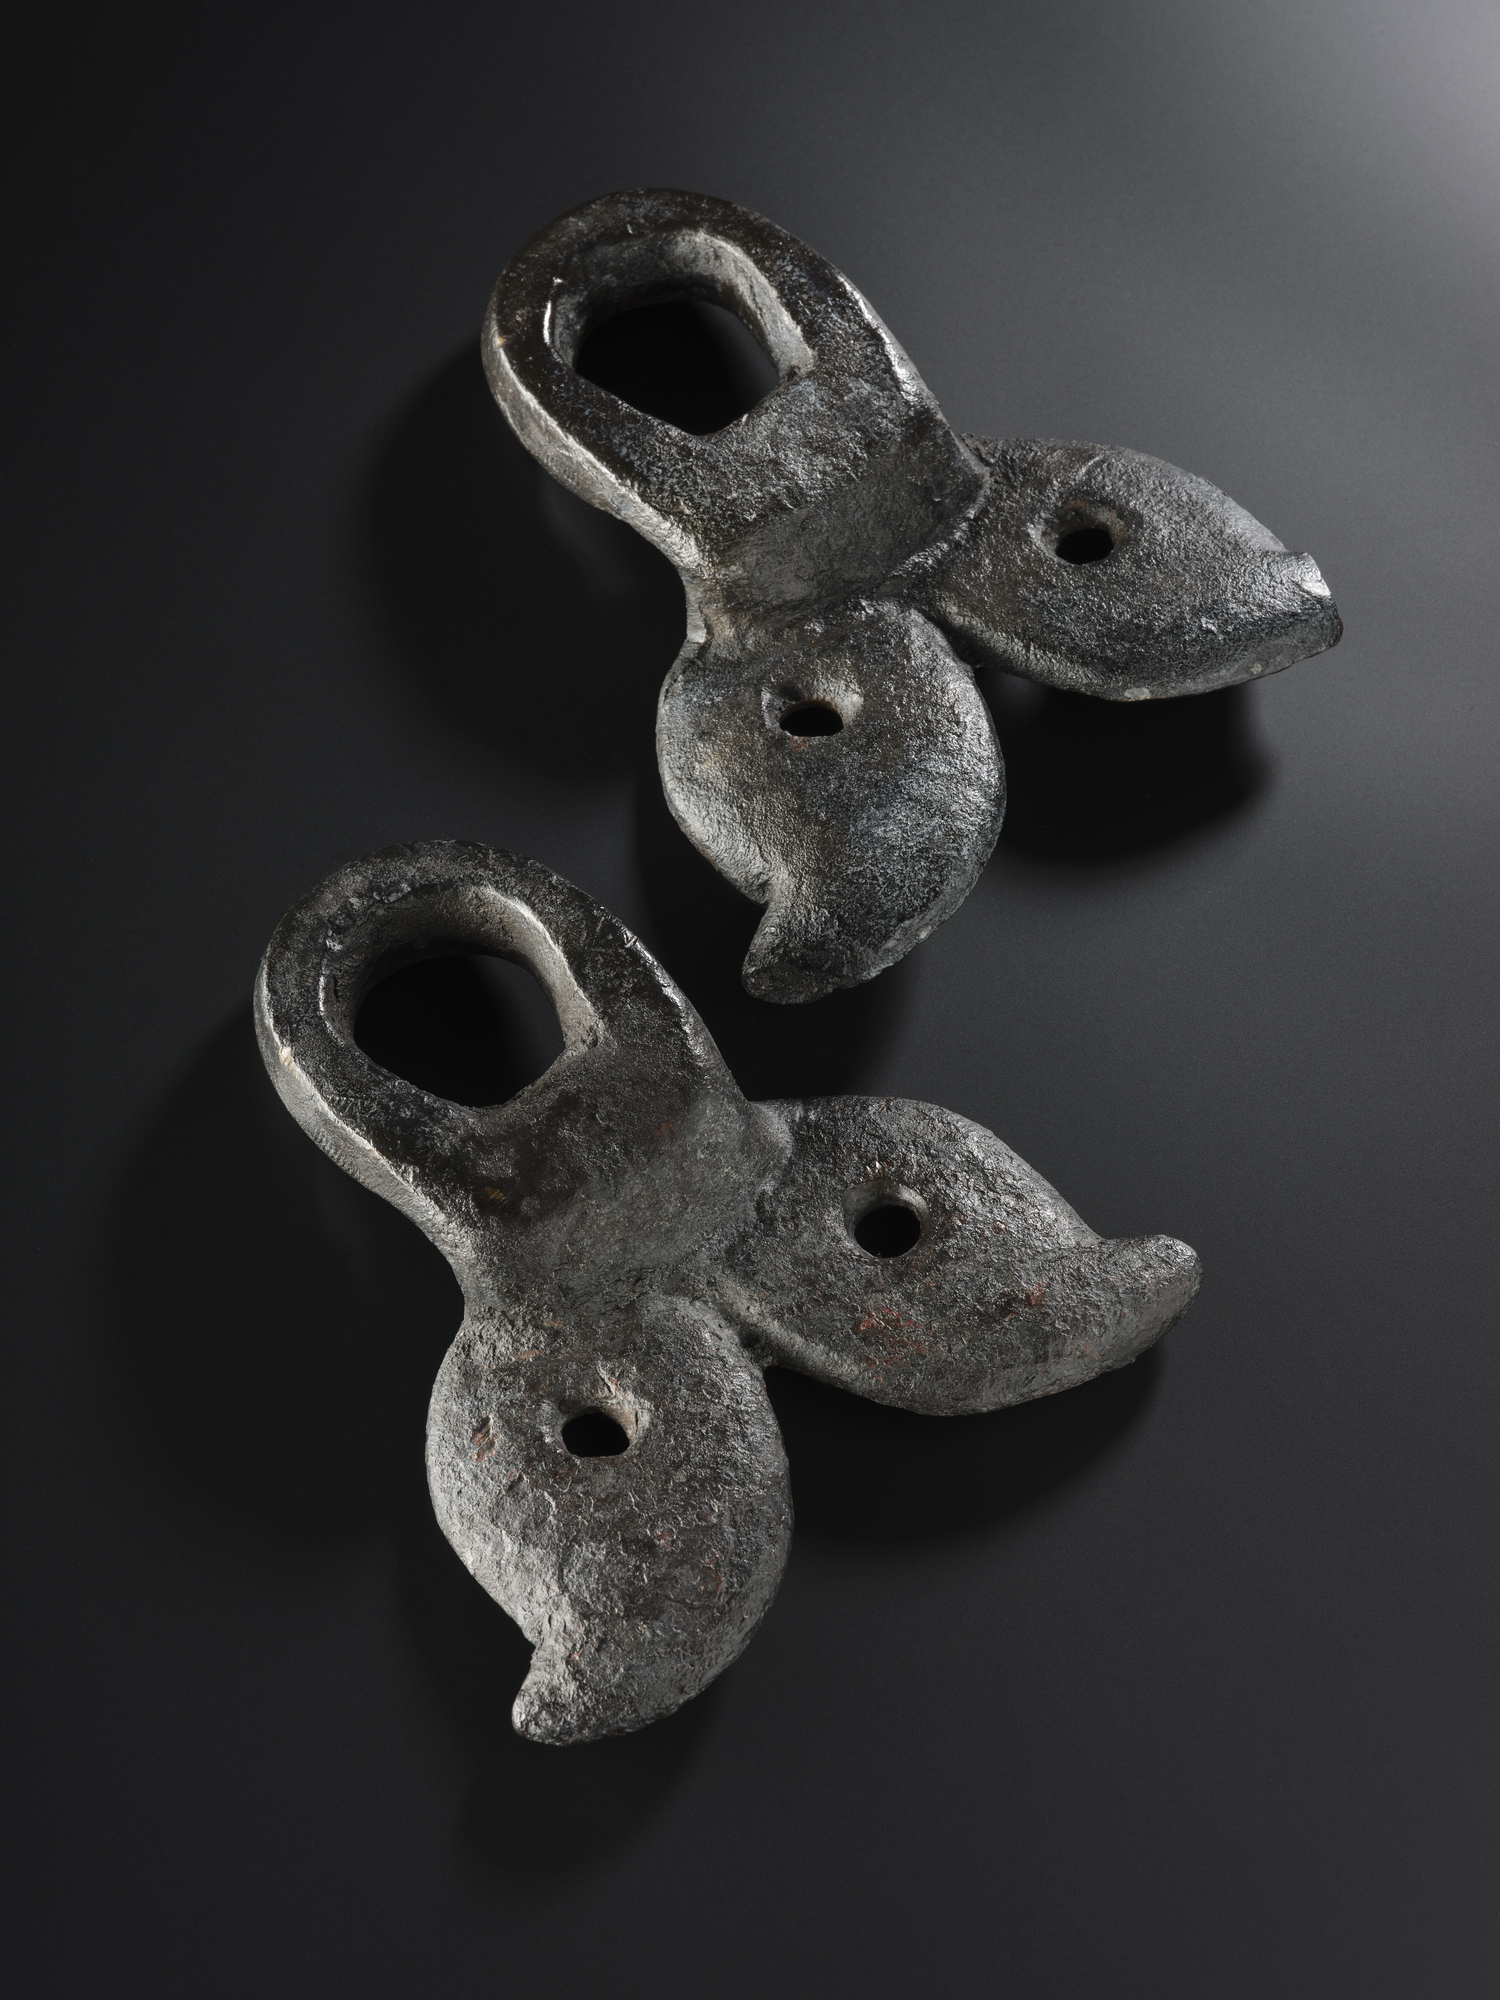 Image of One of a pair of massive loops of bronze, with fish-tailed end and perforated segments, from the Roman site at Newstead, Roxburghshire, 80 - 180 AD © National Museums Scotland